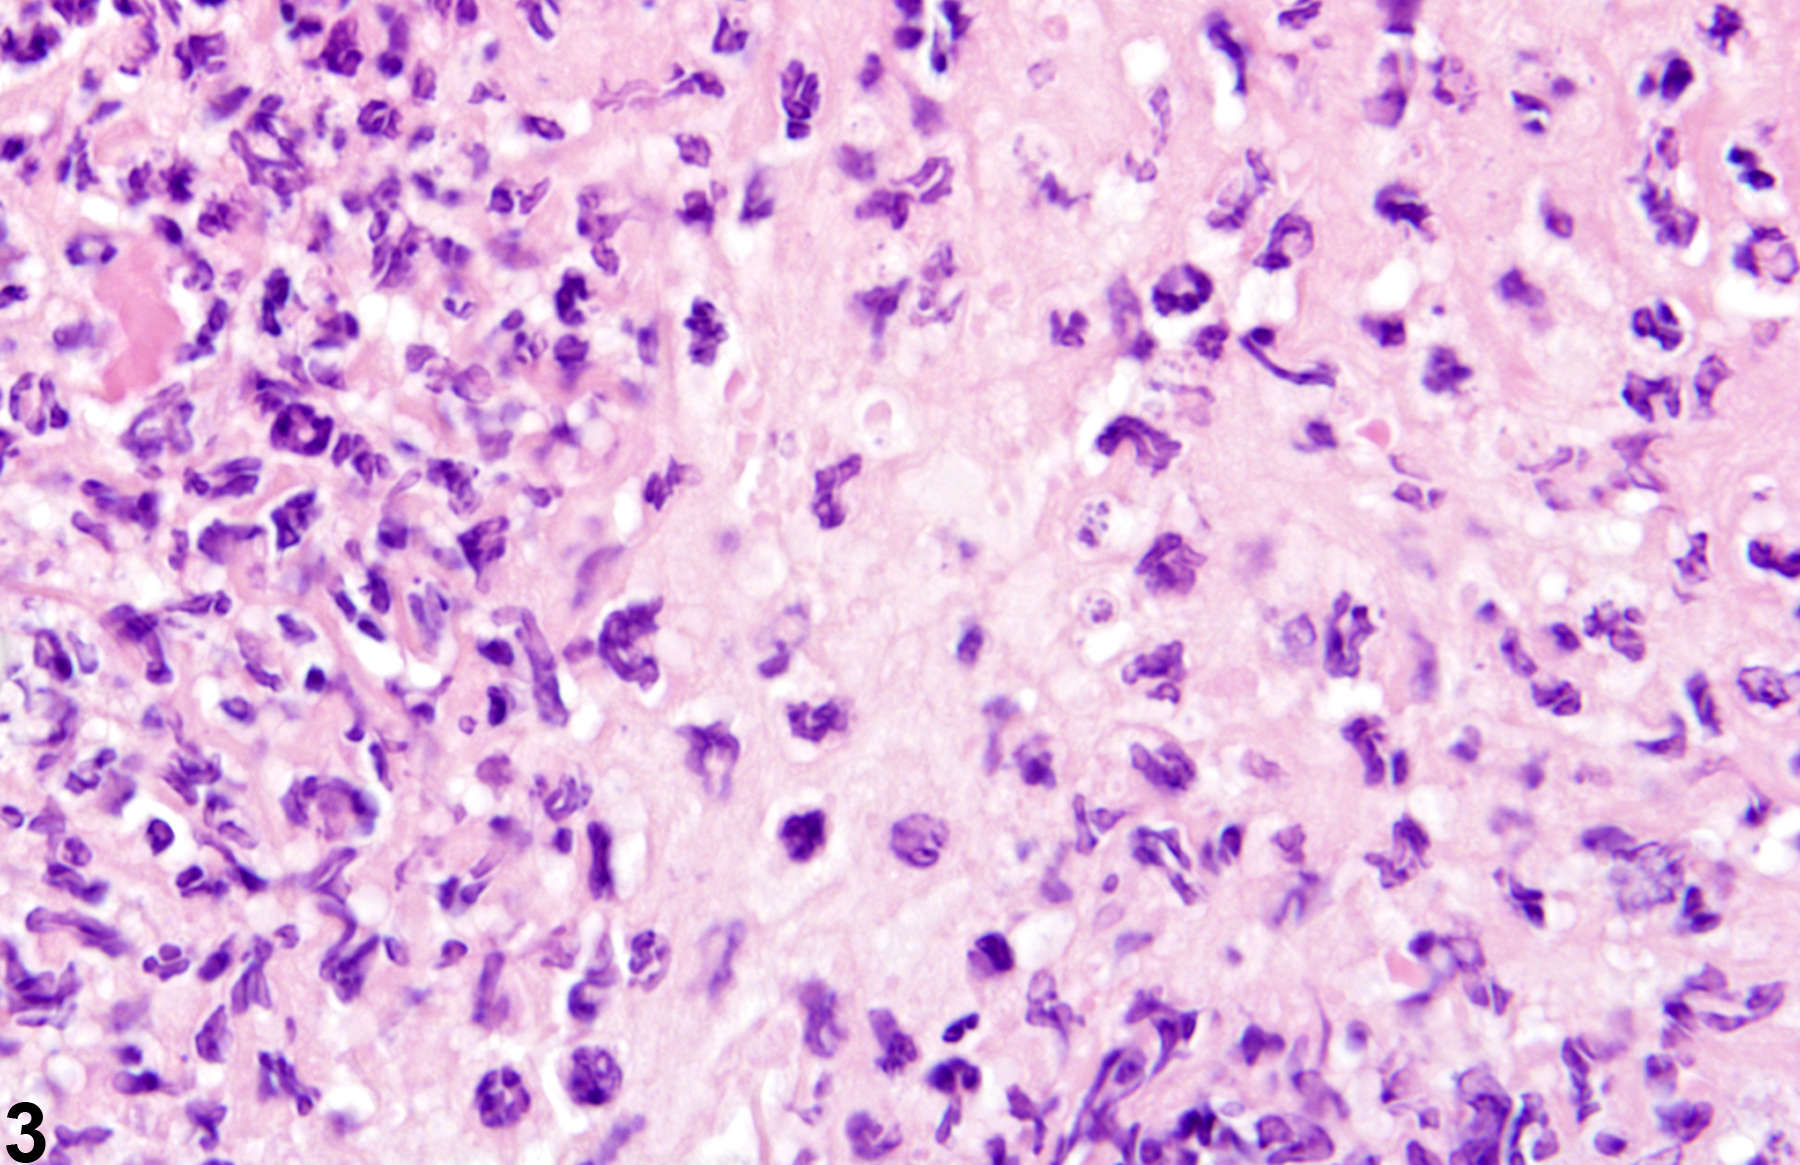 Image of inflammation in the skin from a male B6C3F1 mouse in a chronic study